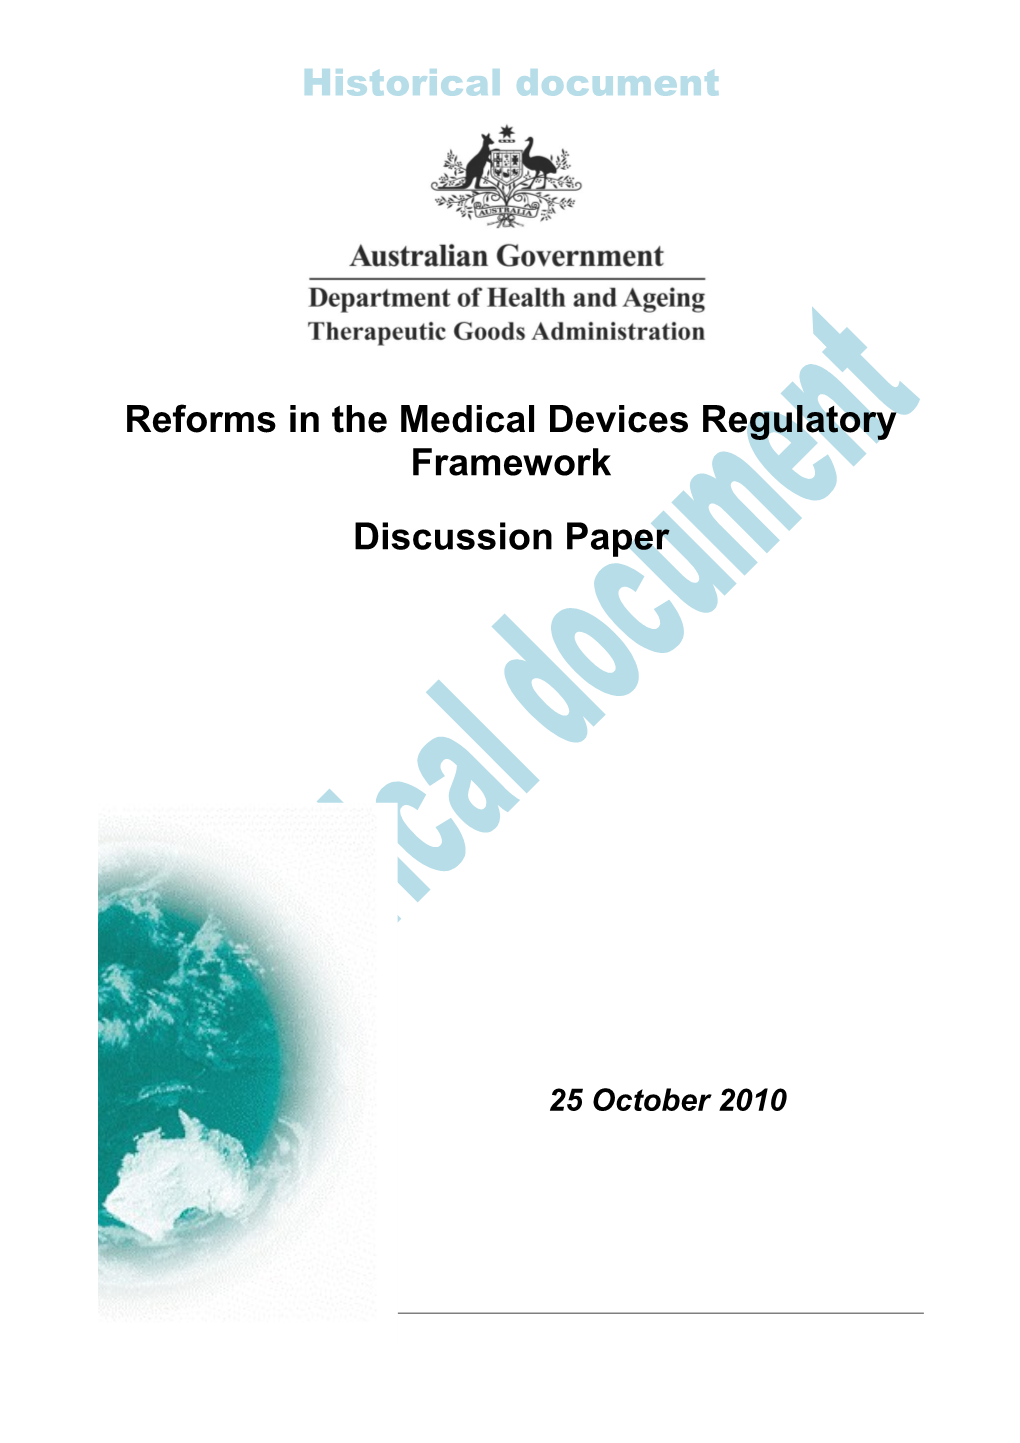 Discussion Paper: Reforms in the Medical Devices Regulatory Framework